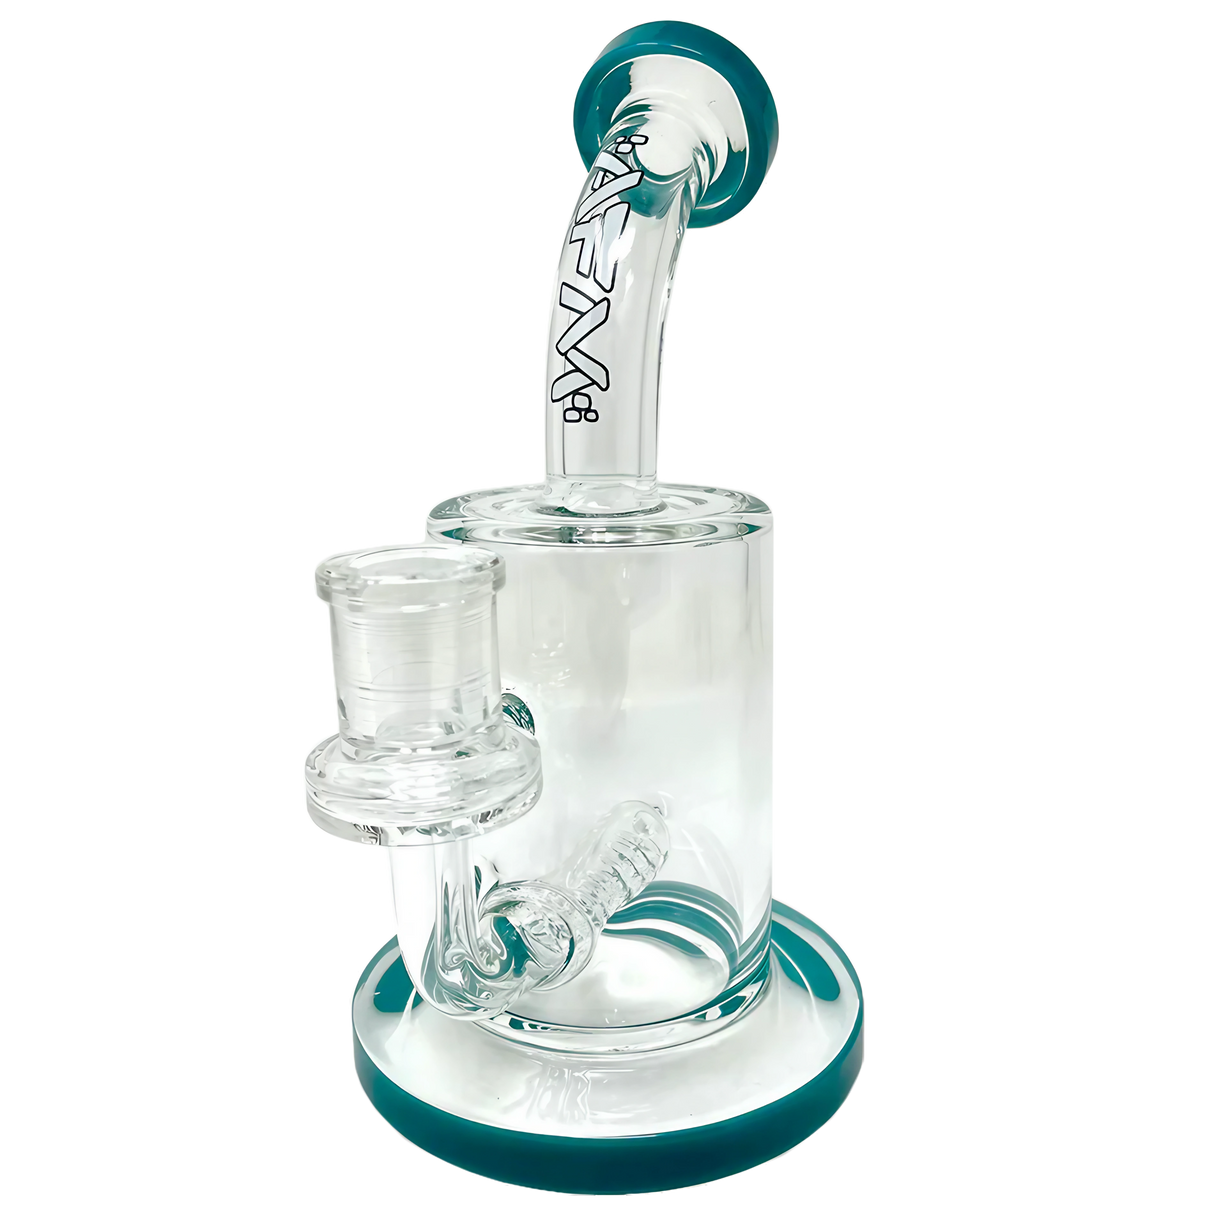 AFM Glass Inline Matrix Rig, 7.5" tall, clear borosilicate glass, with in-line percolator, side view